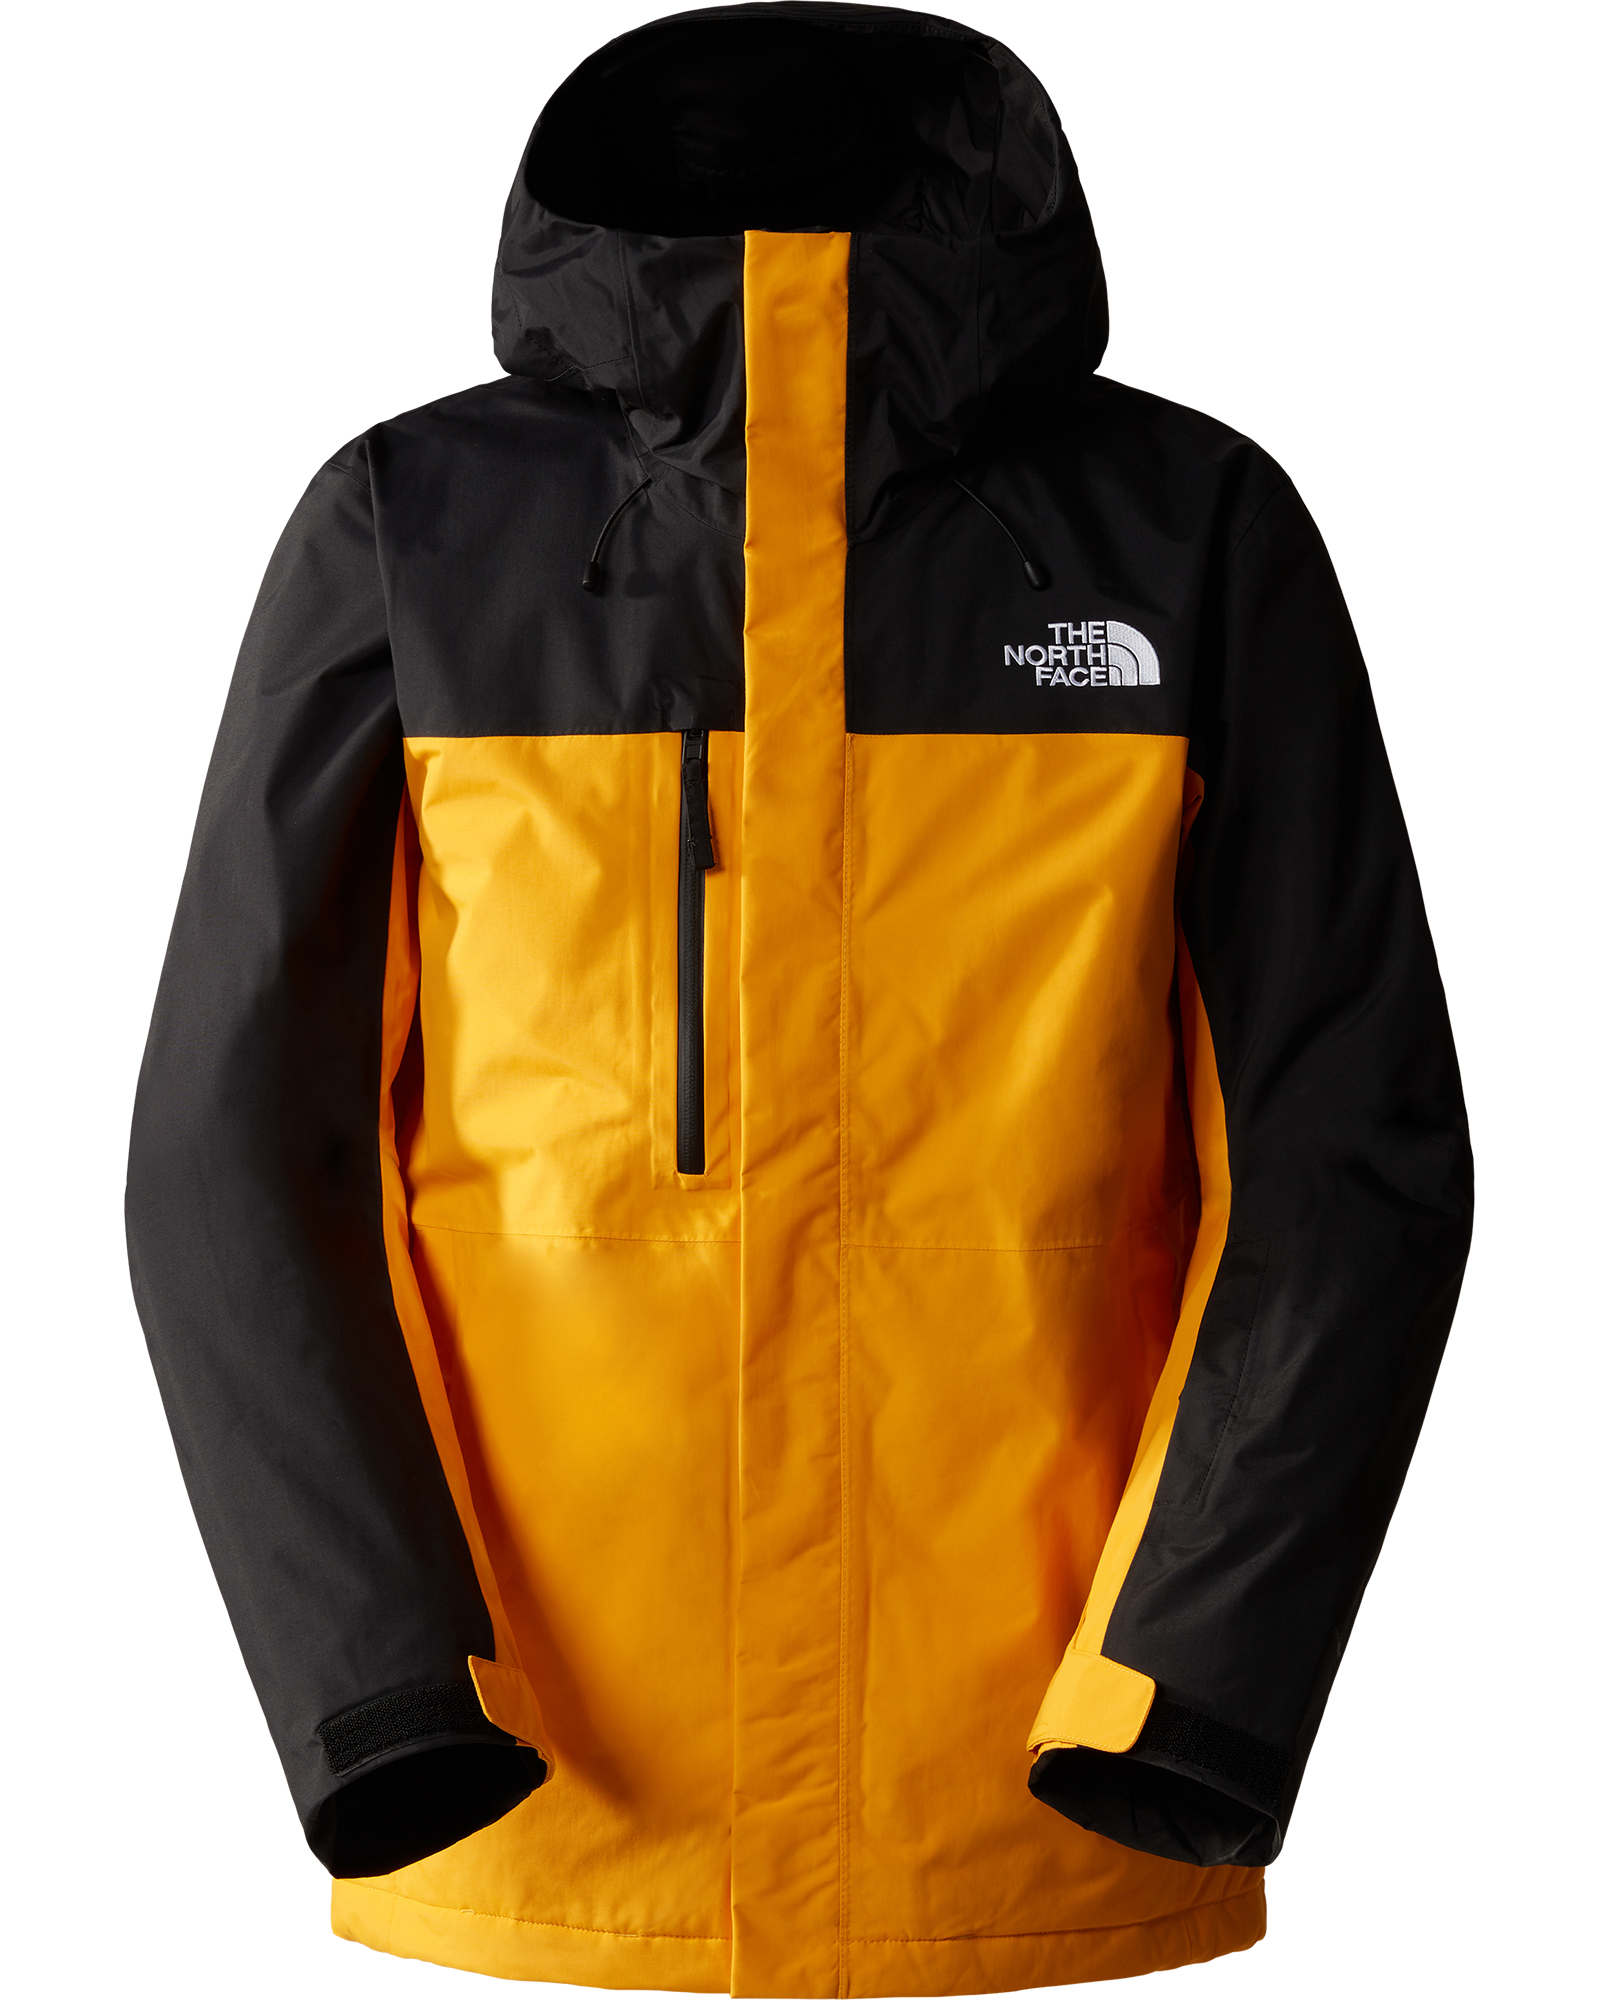 The North Face Men’s Freedom Insulated Jacket - Summit Gold/TNF Black XXL